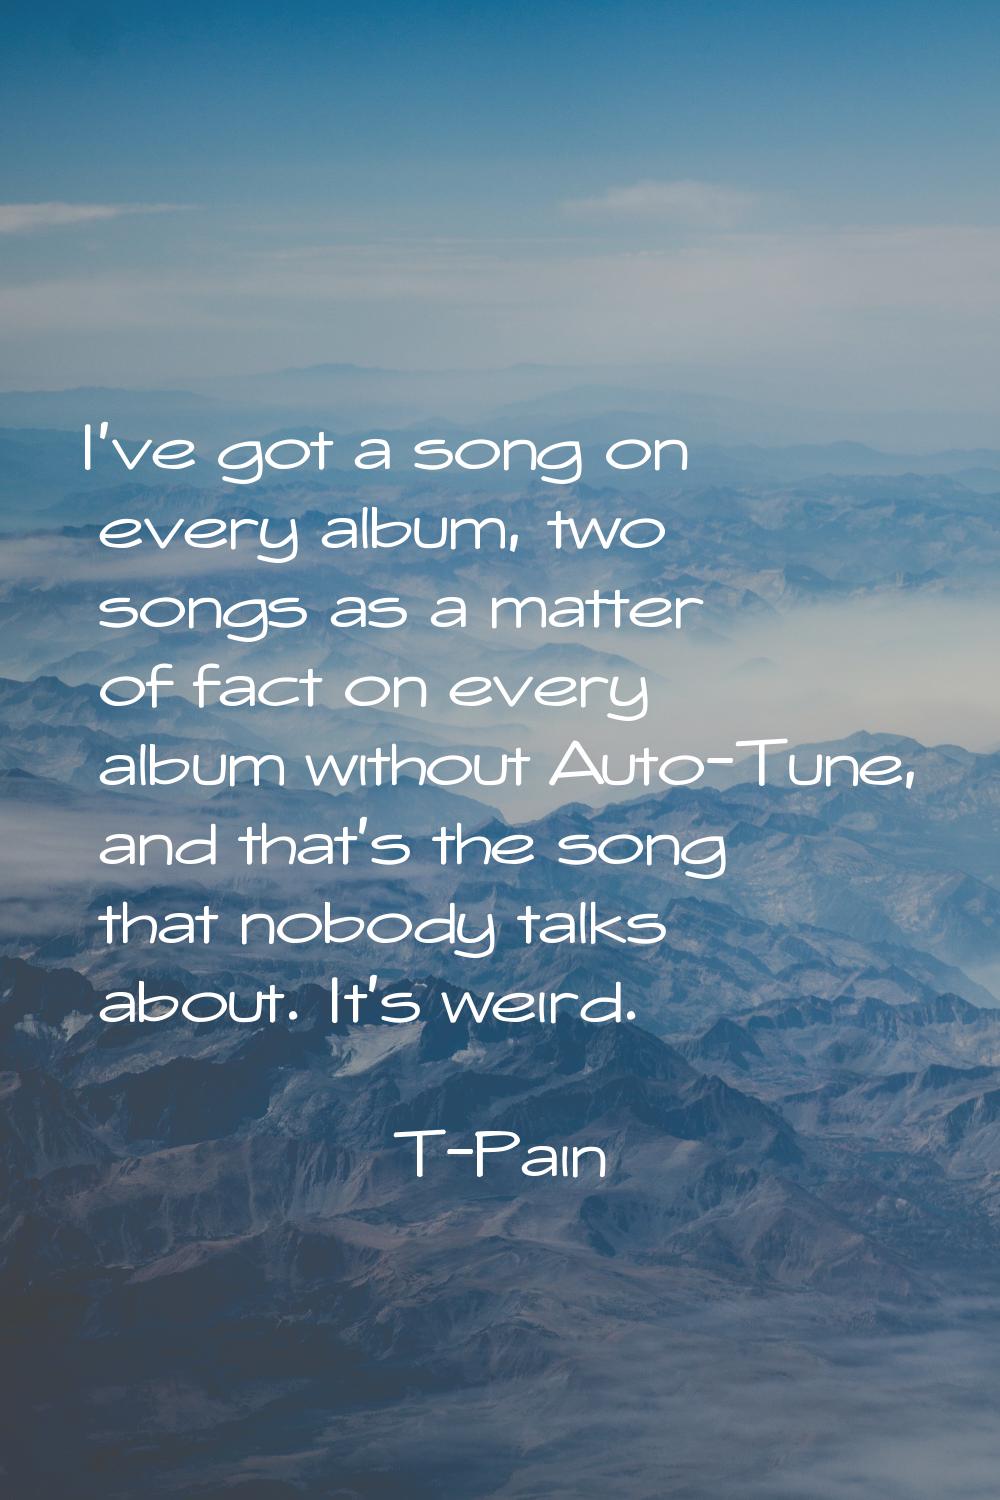 I've got a song on every album, two songs as a matter of fact on every album without Auto-Tune, and